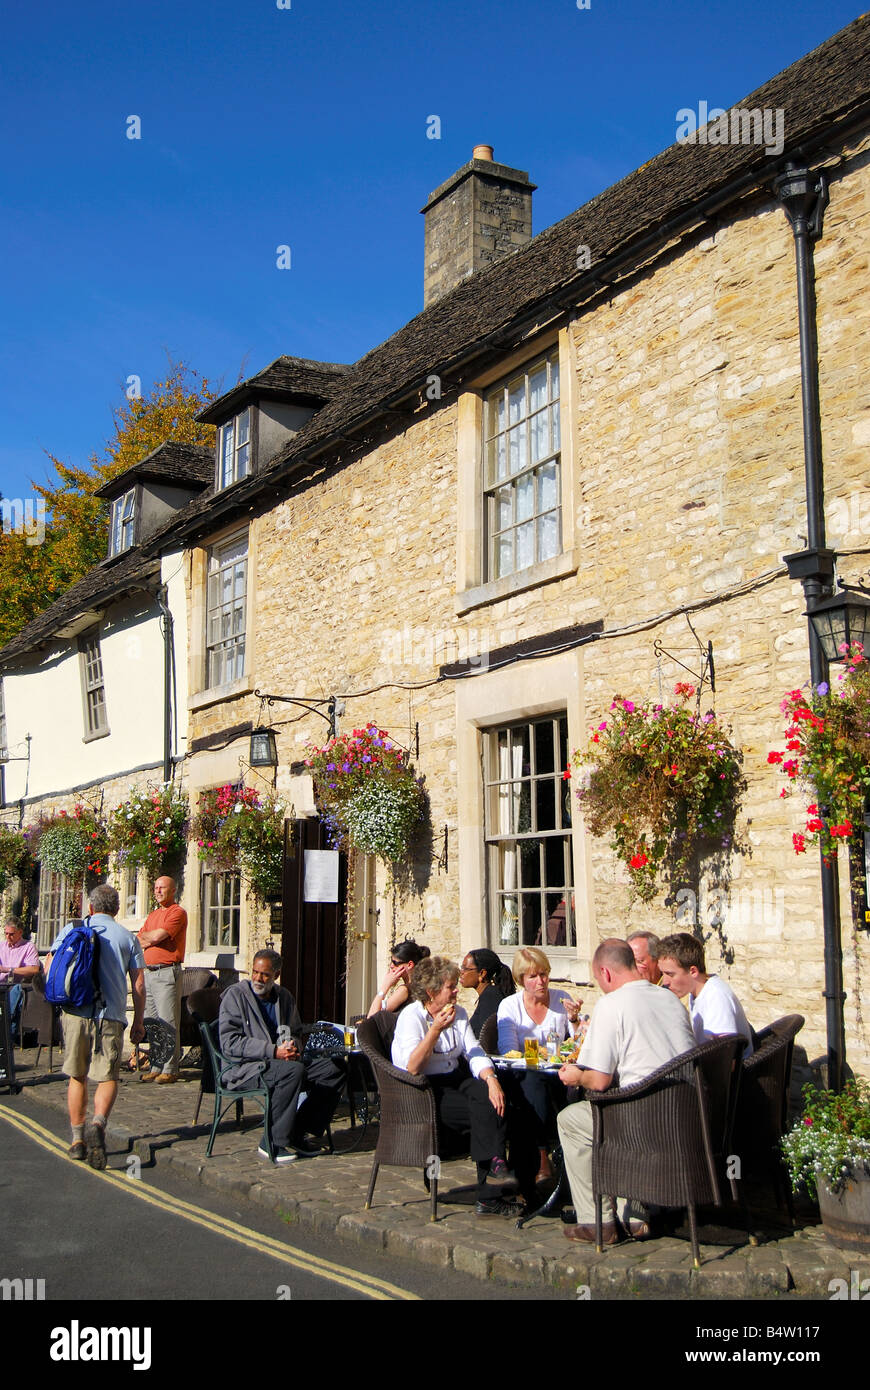 Outdoor restaurant, The Castle Inn Hotel, Castle Combe, Wiltshire, England, United Kingdom Stock Photo